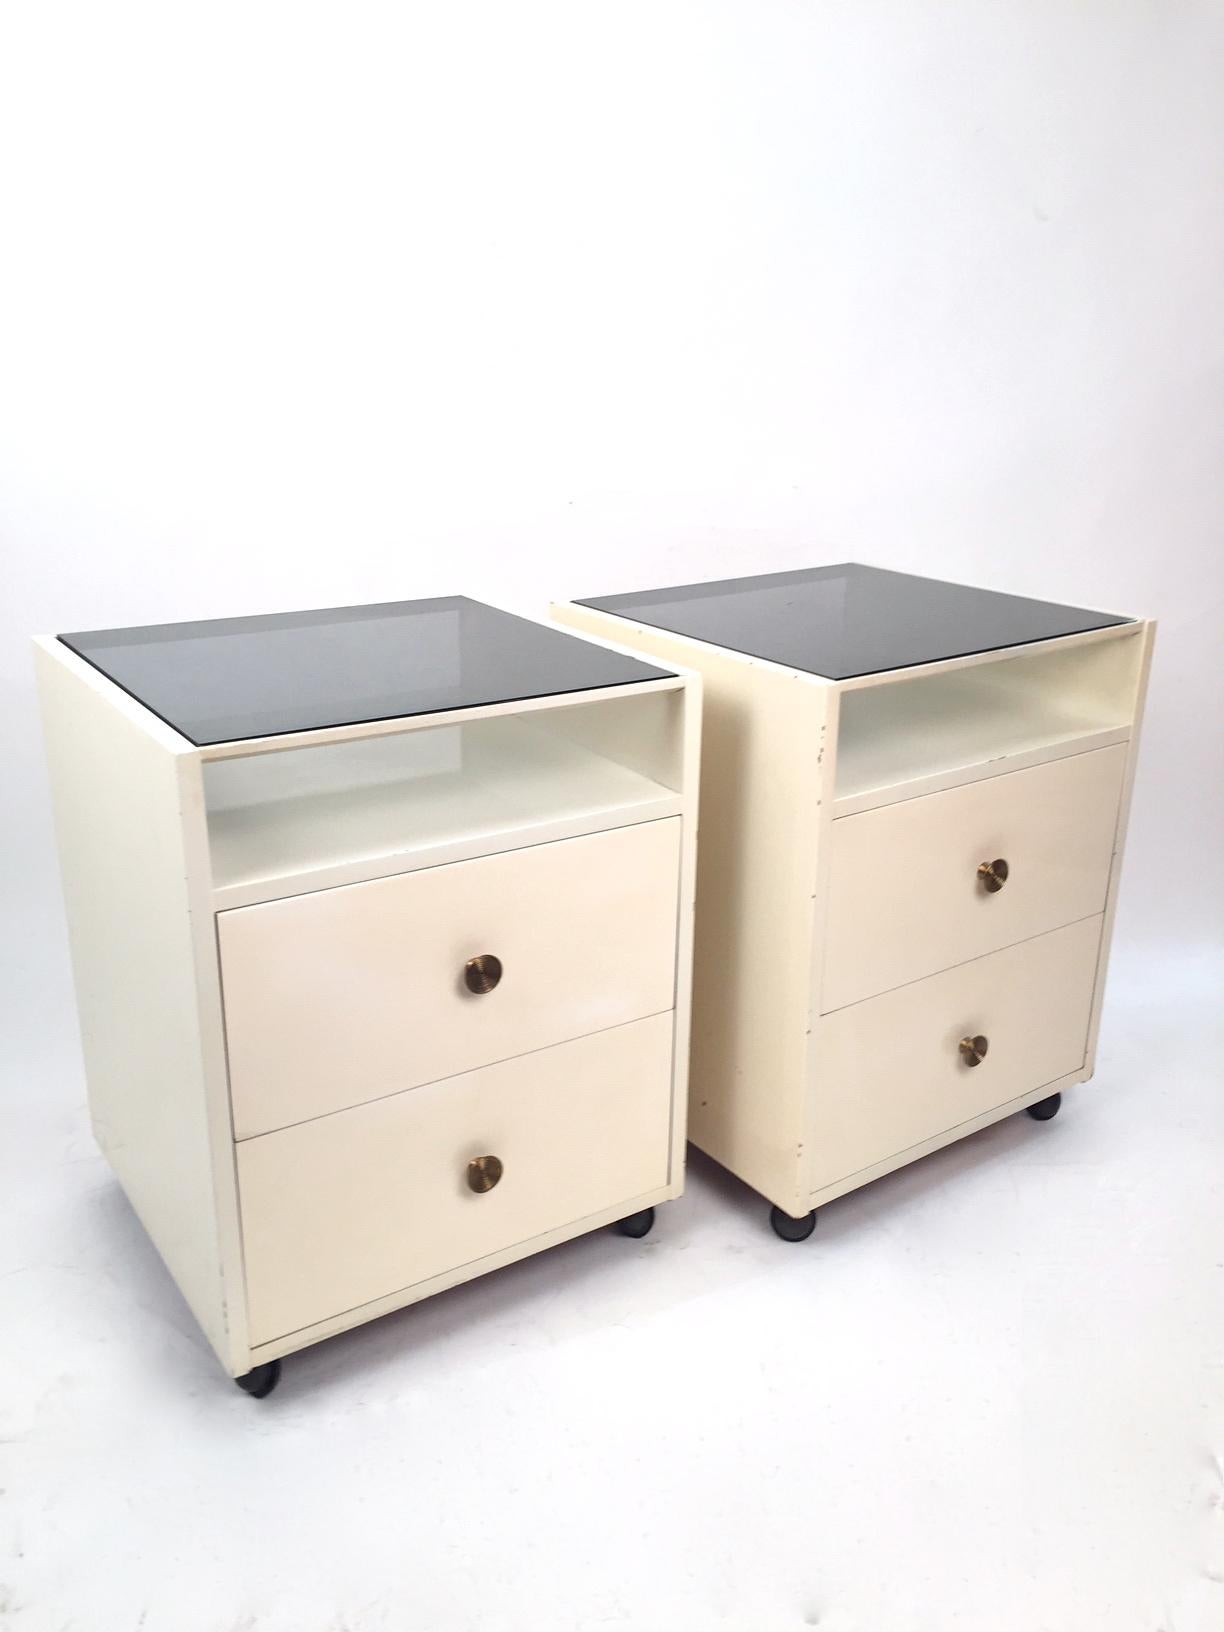 Lacquered Pair of Mid-Century Modern Carlo de Carli Nightstands for Sormani, 1960